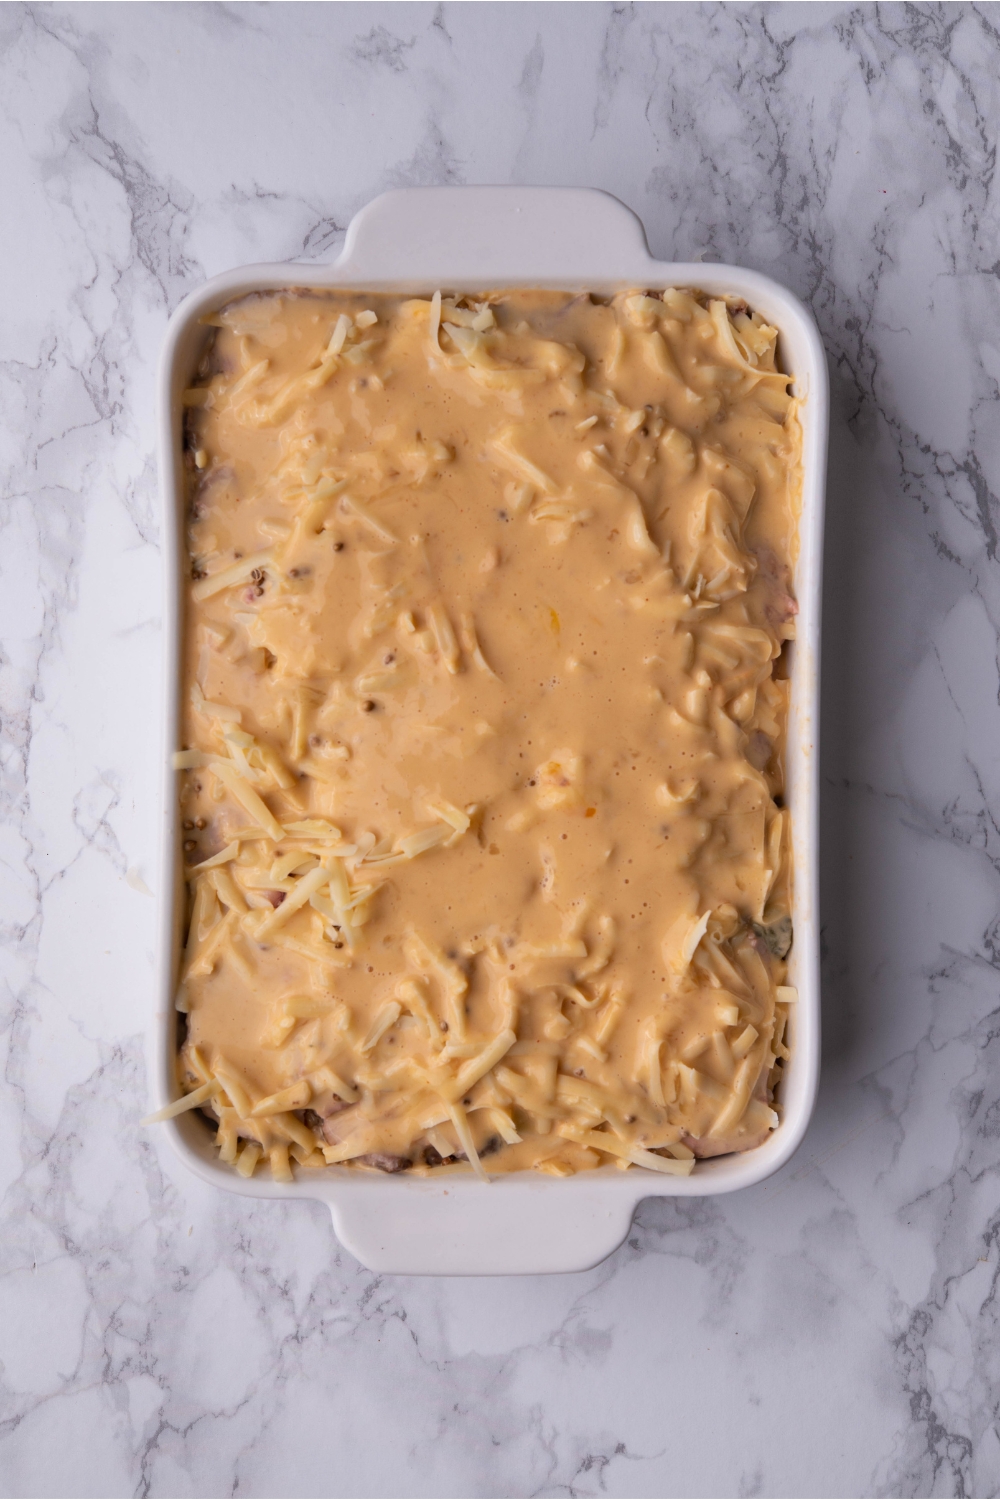 Unbaked Reuben casserole covered in a creamy sauce mixture in a white baking dish.